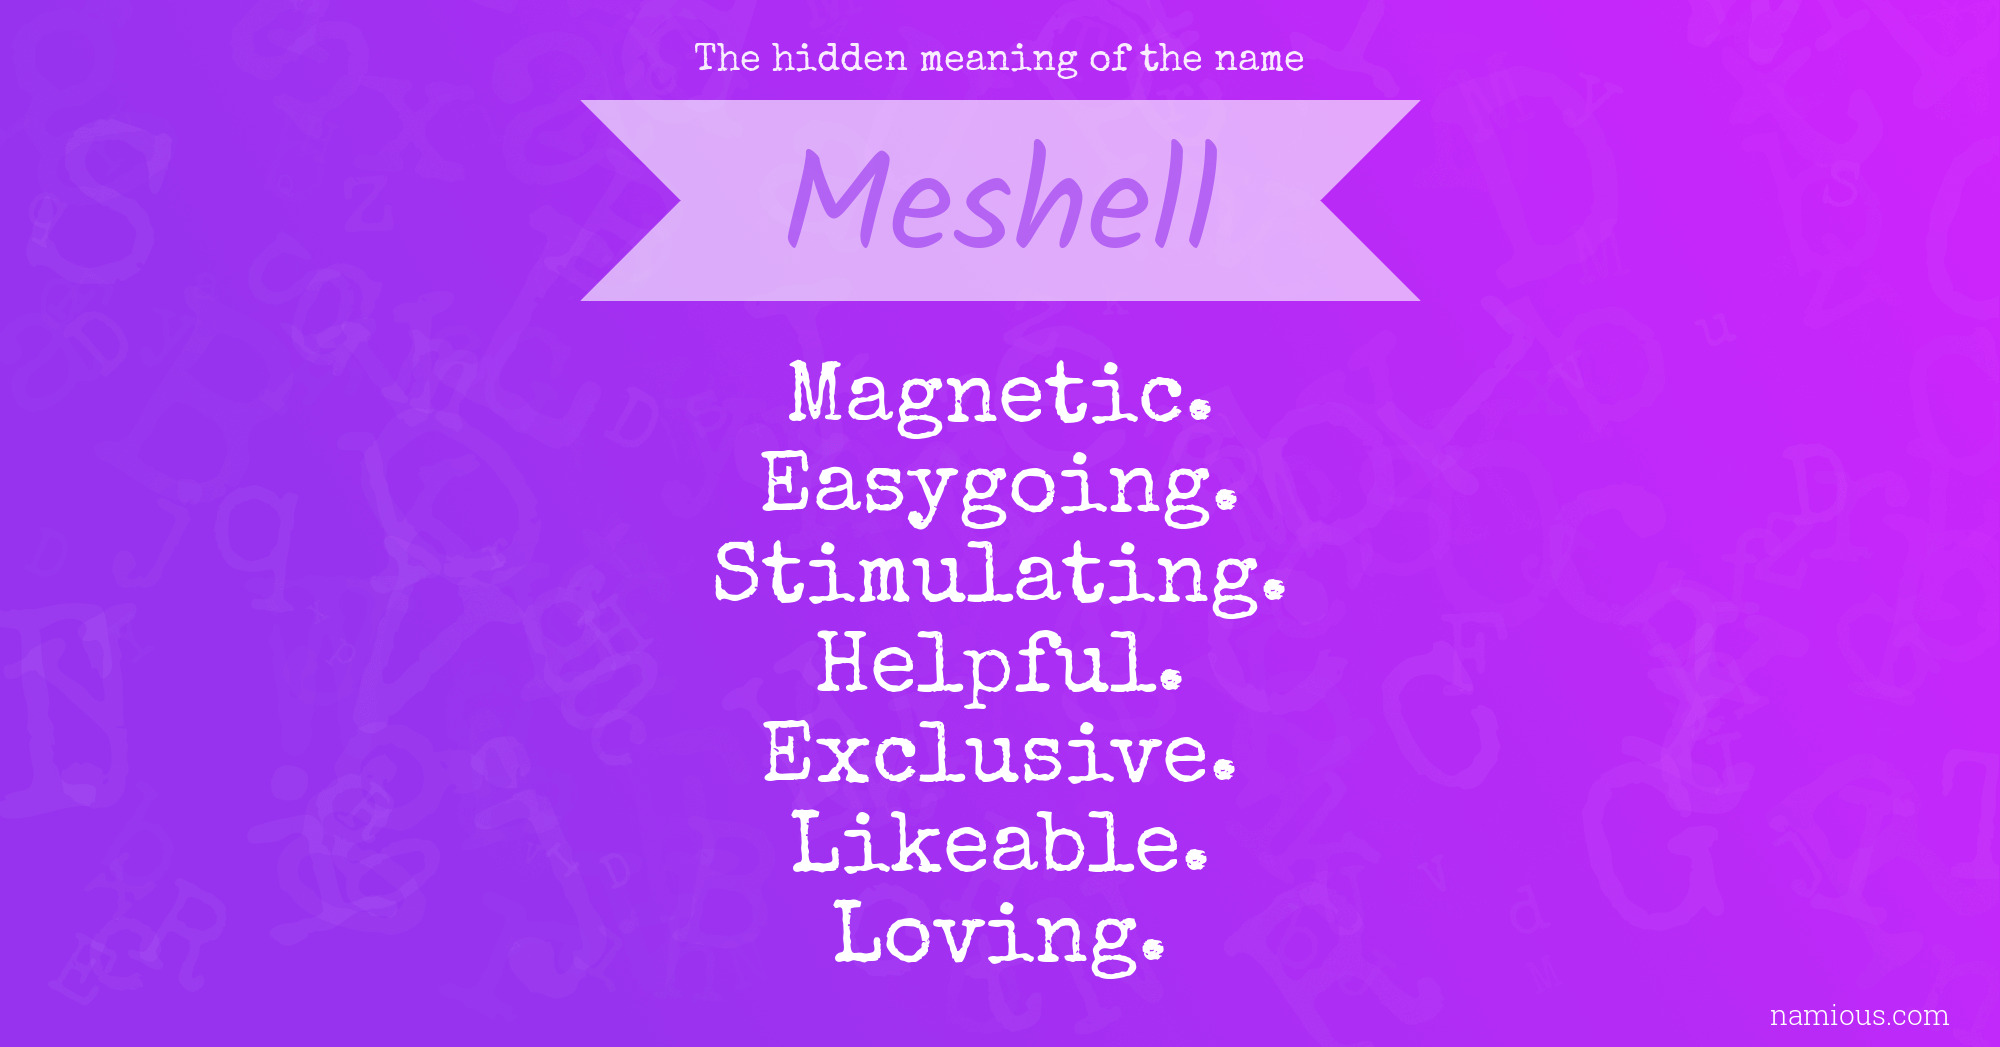 The hidden meaning of the name Meshell